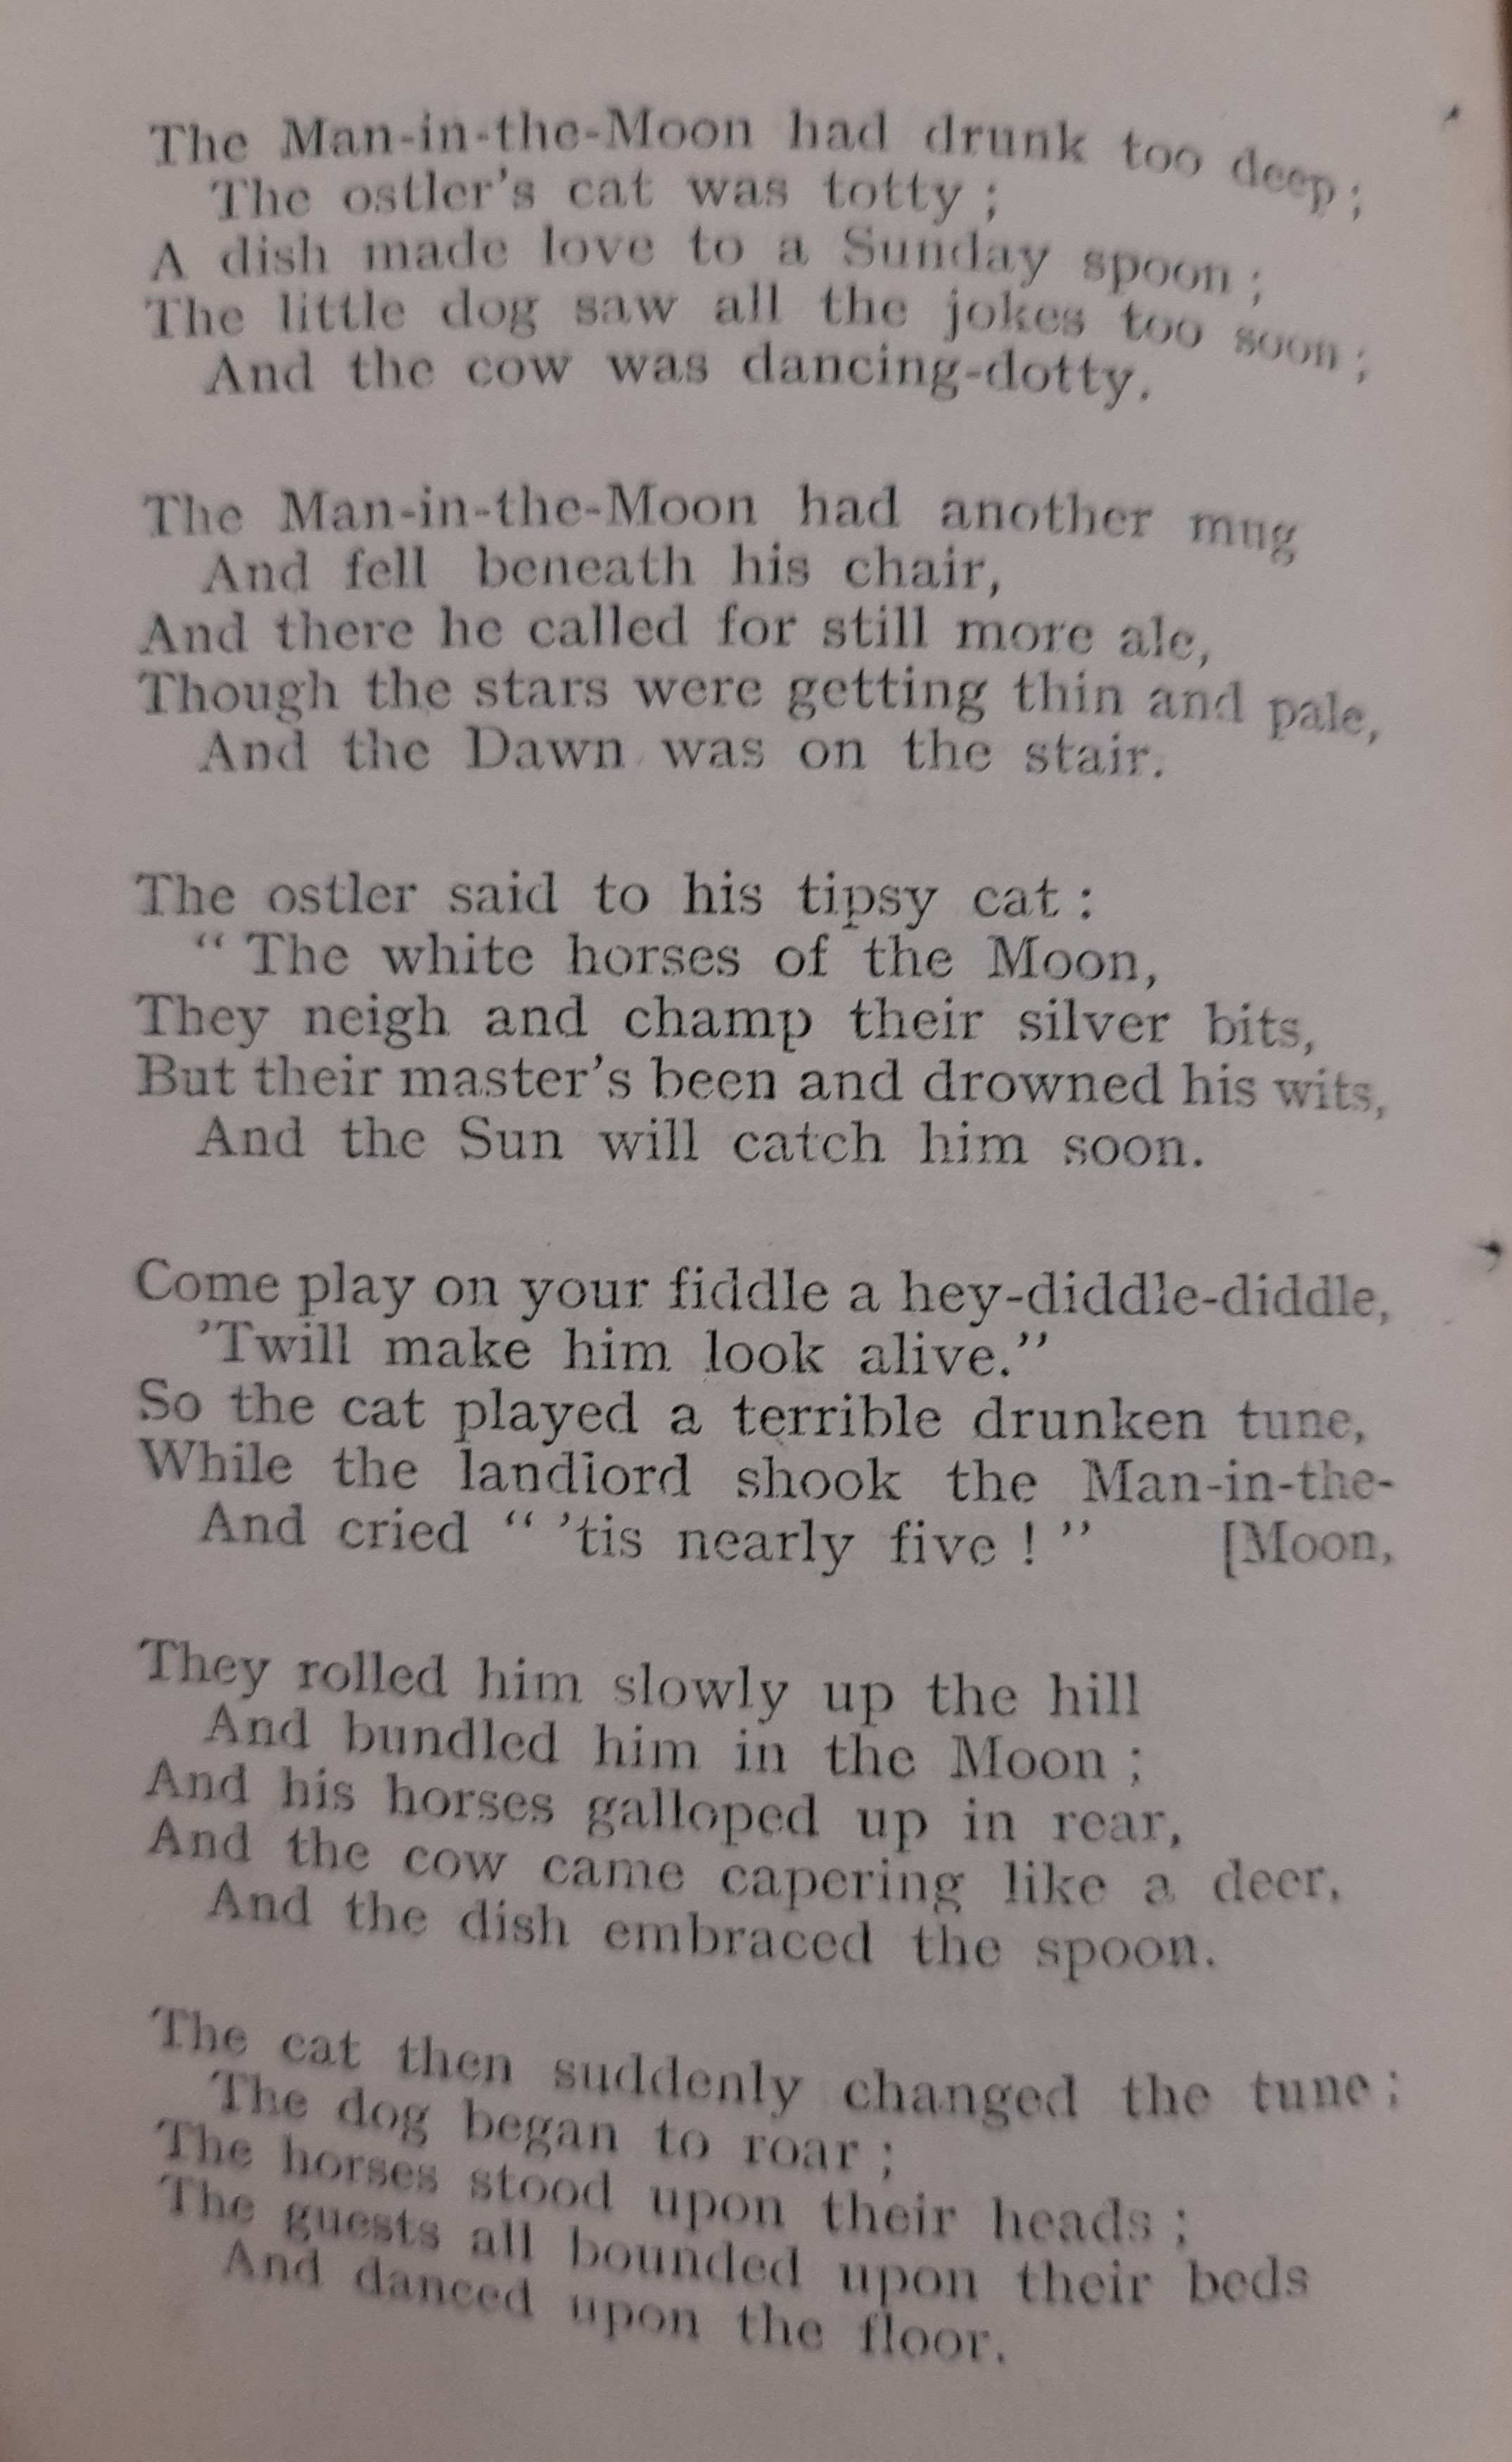 The Cat and the Fiddle A Nursery-Rhyme Undone and its Scandalous Secret Unlocked, Yorkshire Poetry, Vol. 11 No. 19, October-November 1923 page 2.jpg